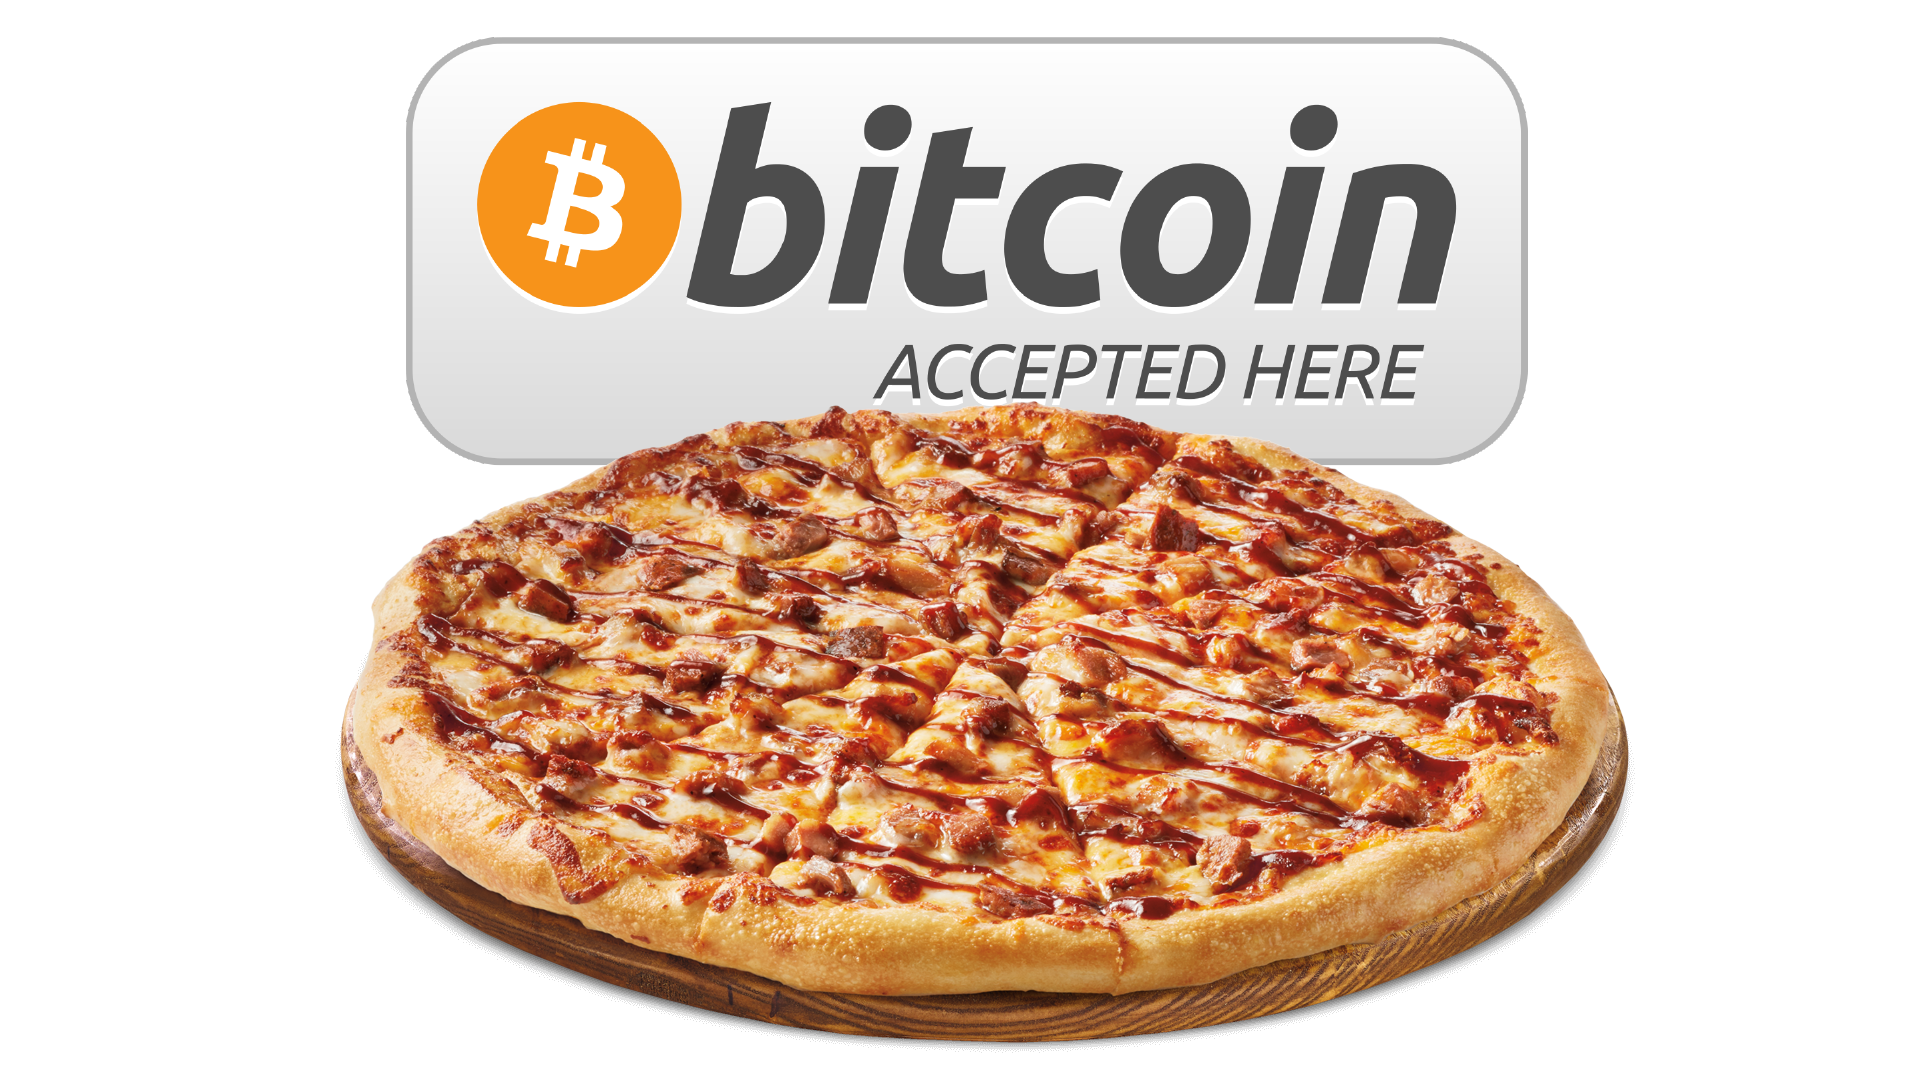 Meet the crypto developer who spent $ billion in fledgling Bitcoin on pizza | The Independent